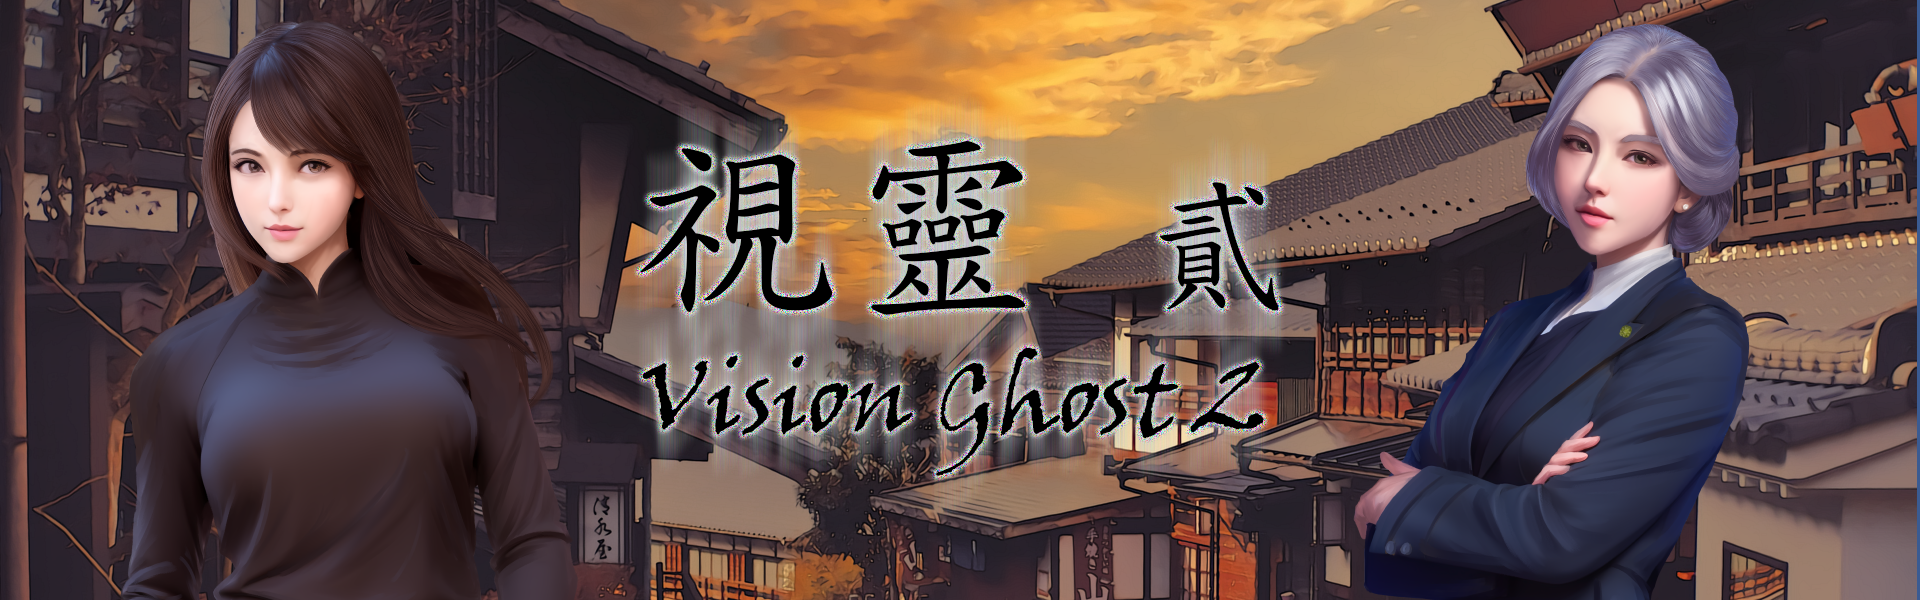 Vision Ghost 2